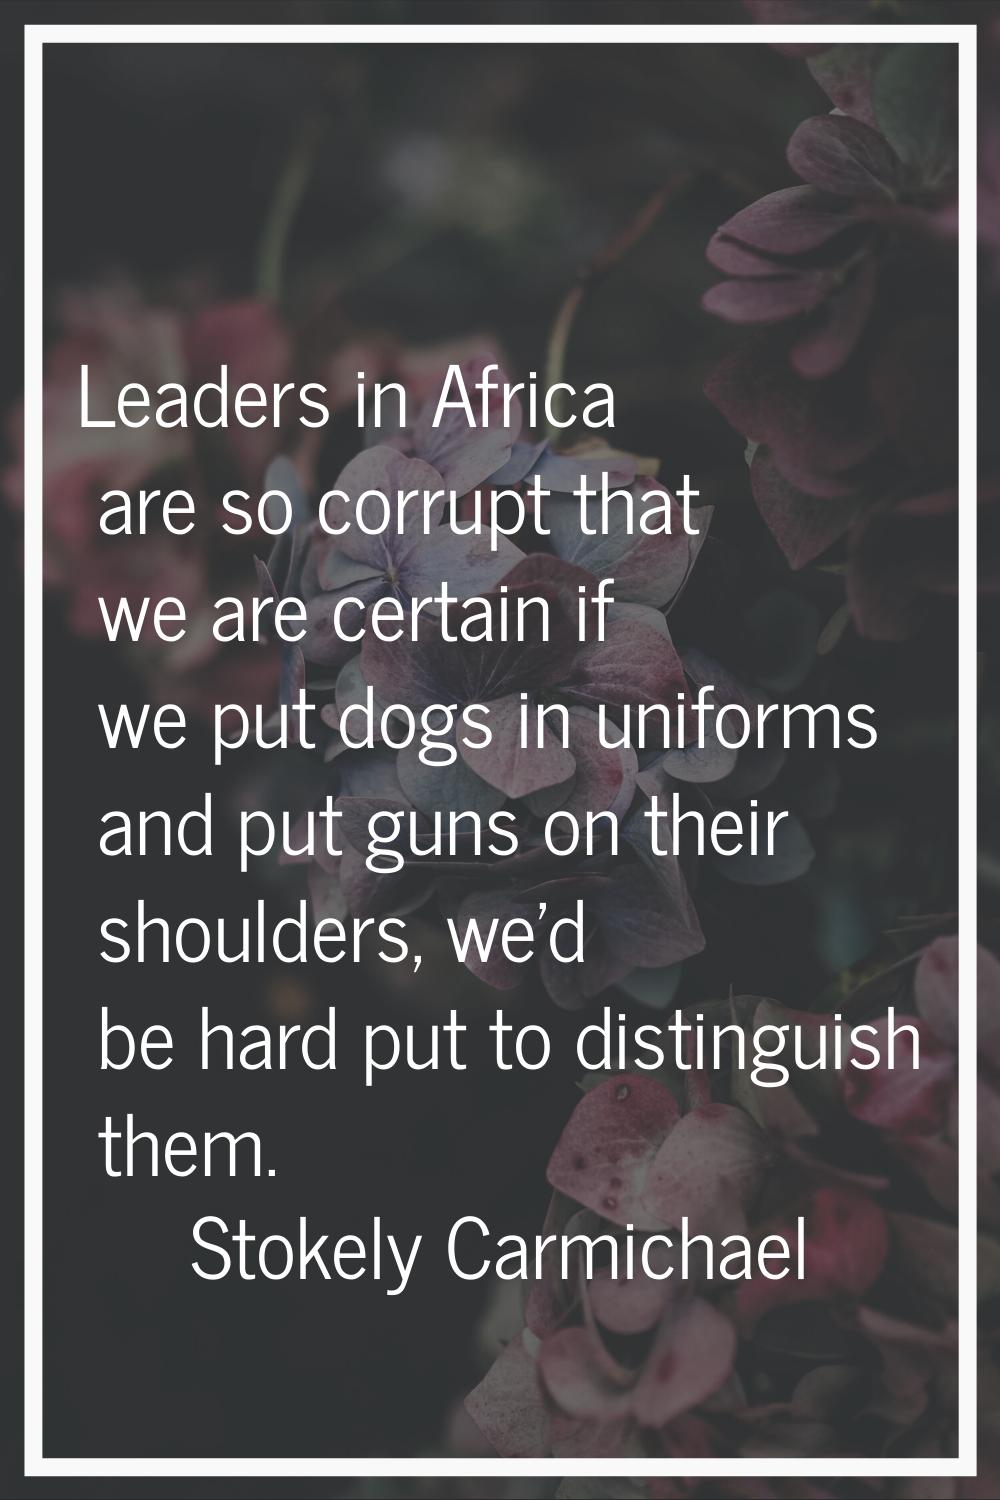 Leaders in Africa are so corrupt that we are certain if we put dogs in uniforms and put guns on the